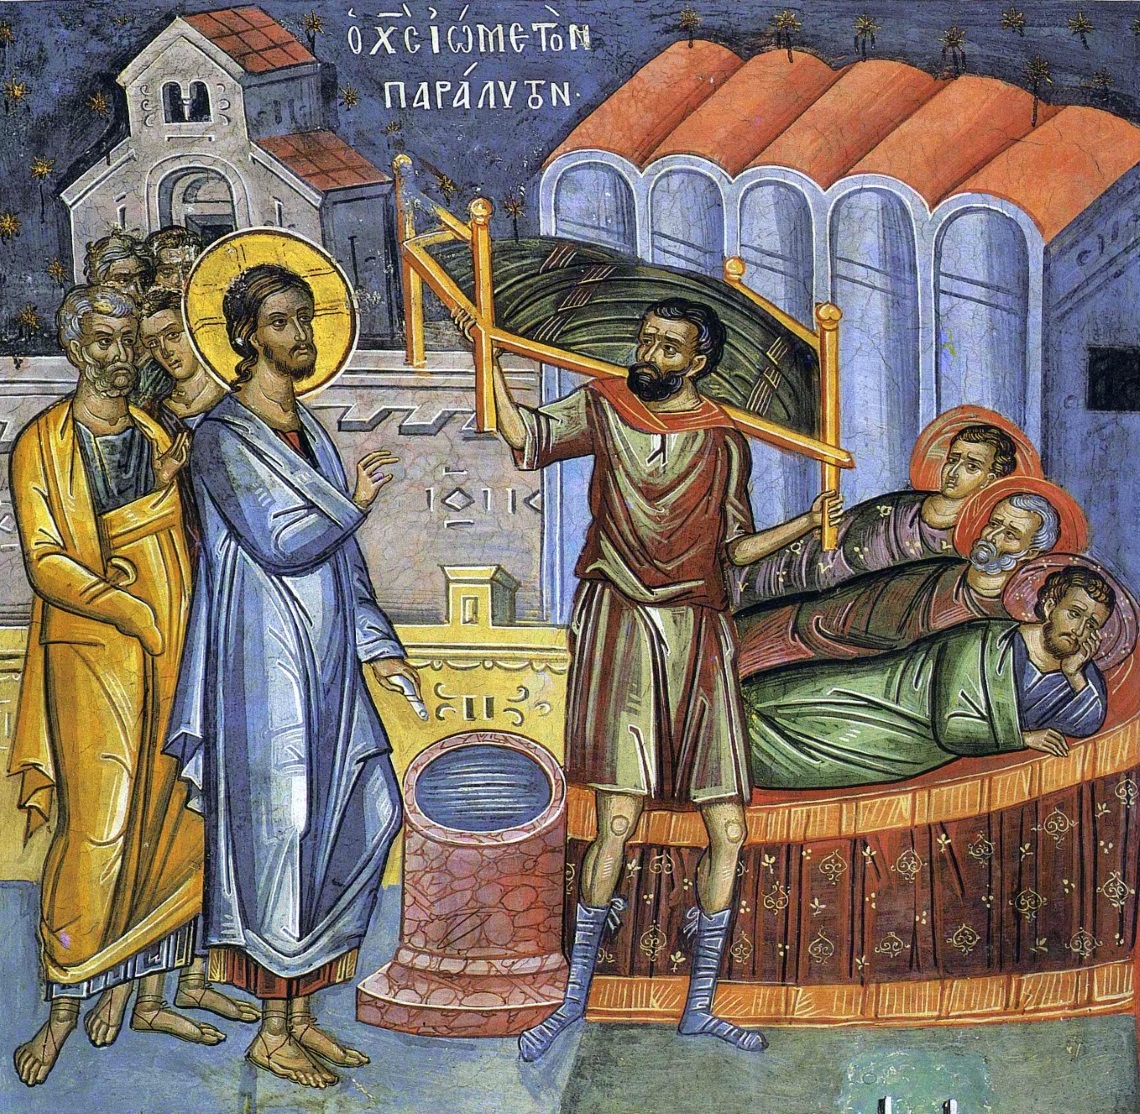 Time and Place in the Healing of the Paralytic